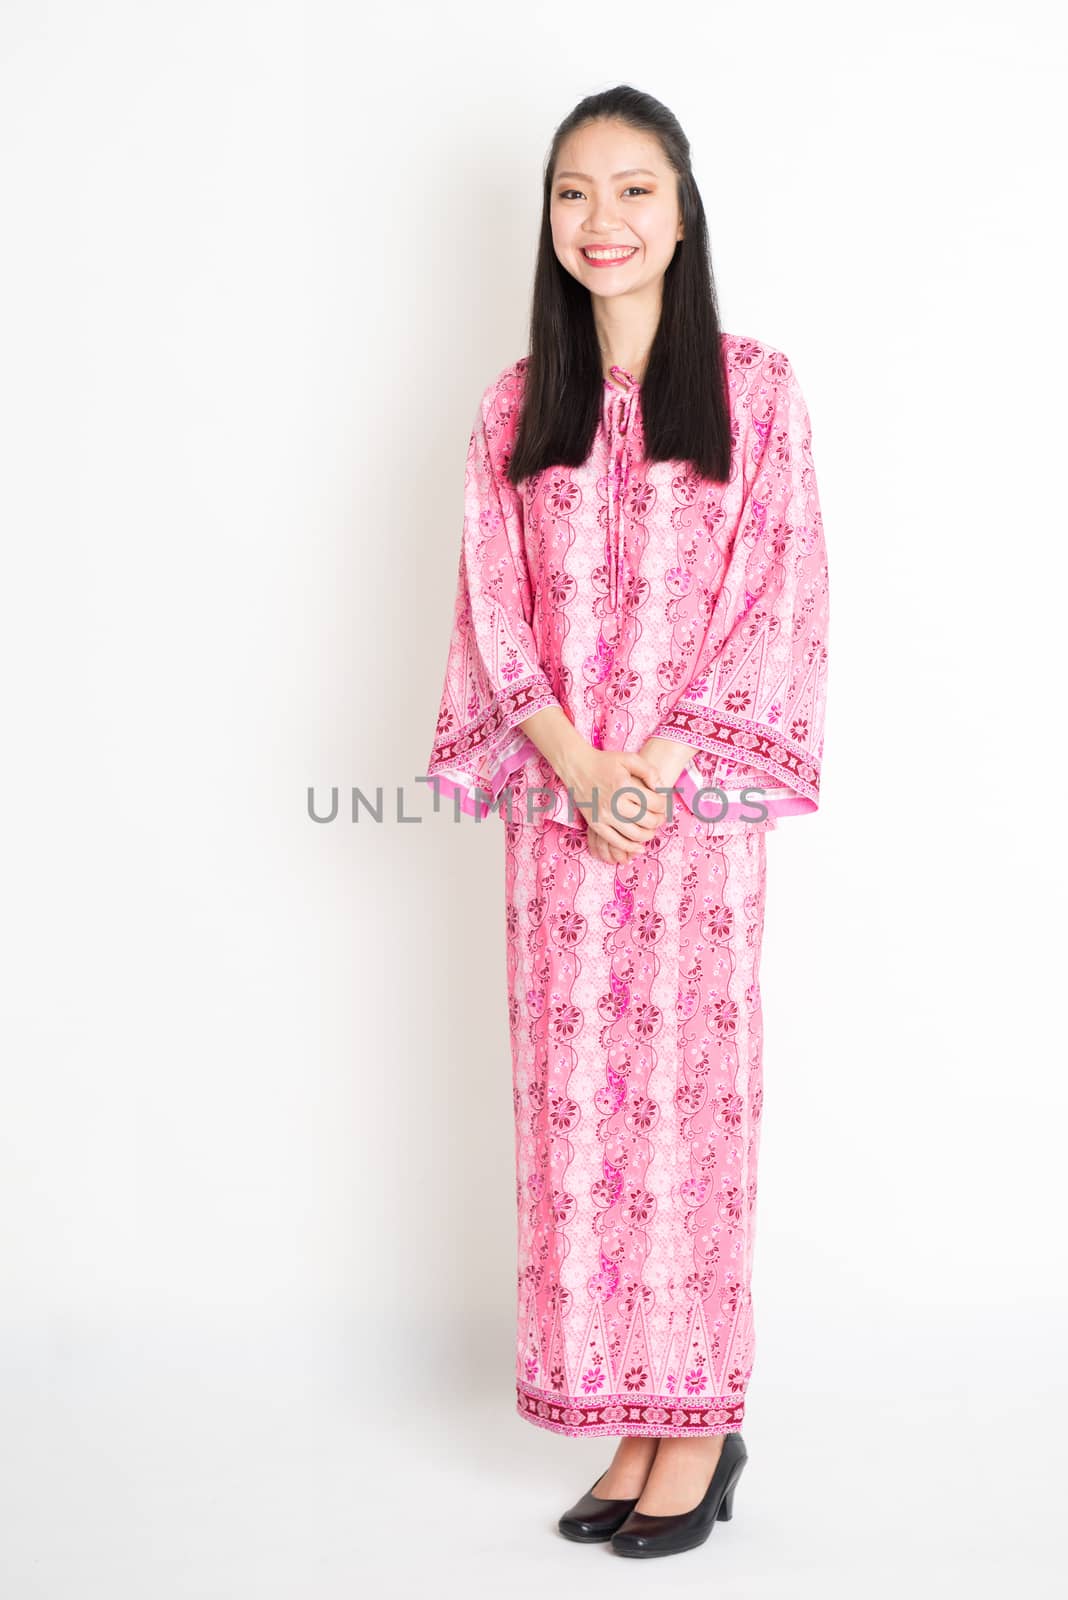 Portrait of young southeast Asian girl in traditional Malay batik dress smiling, standing on plain background.